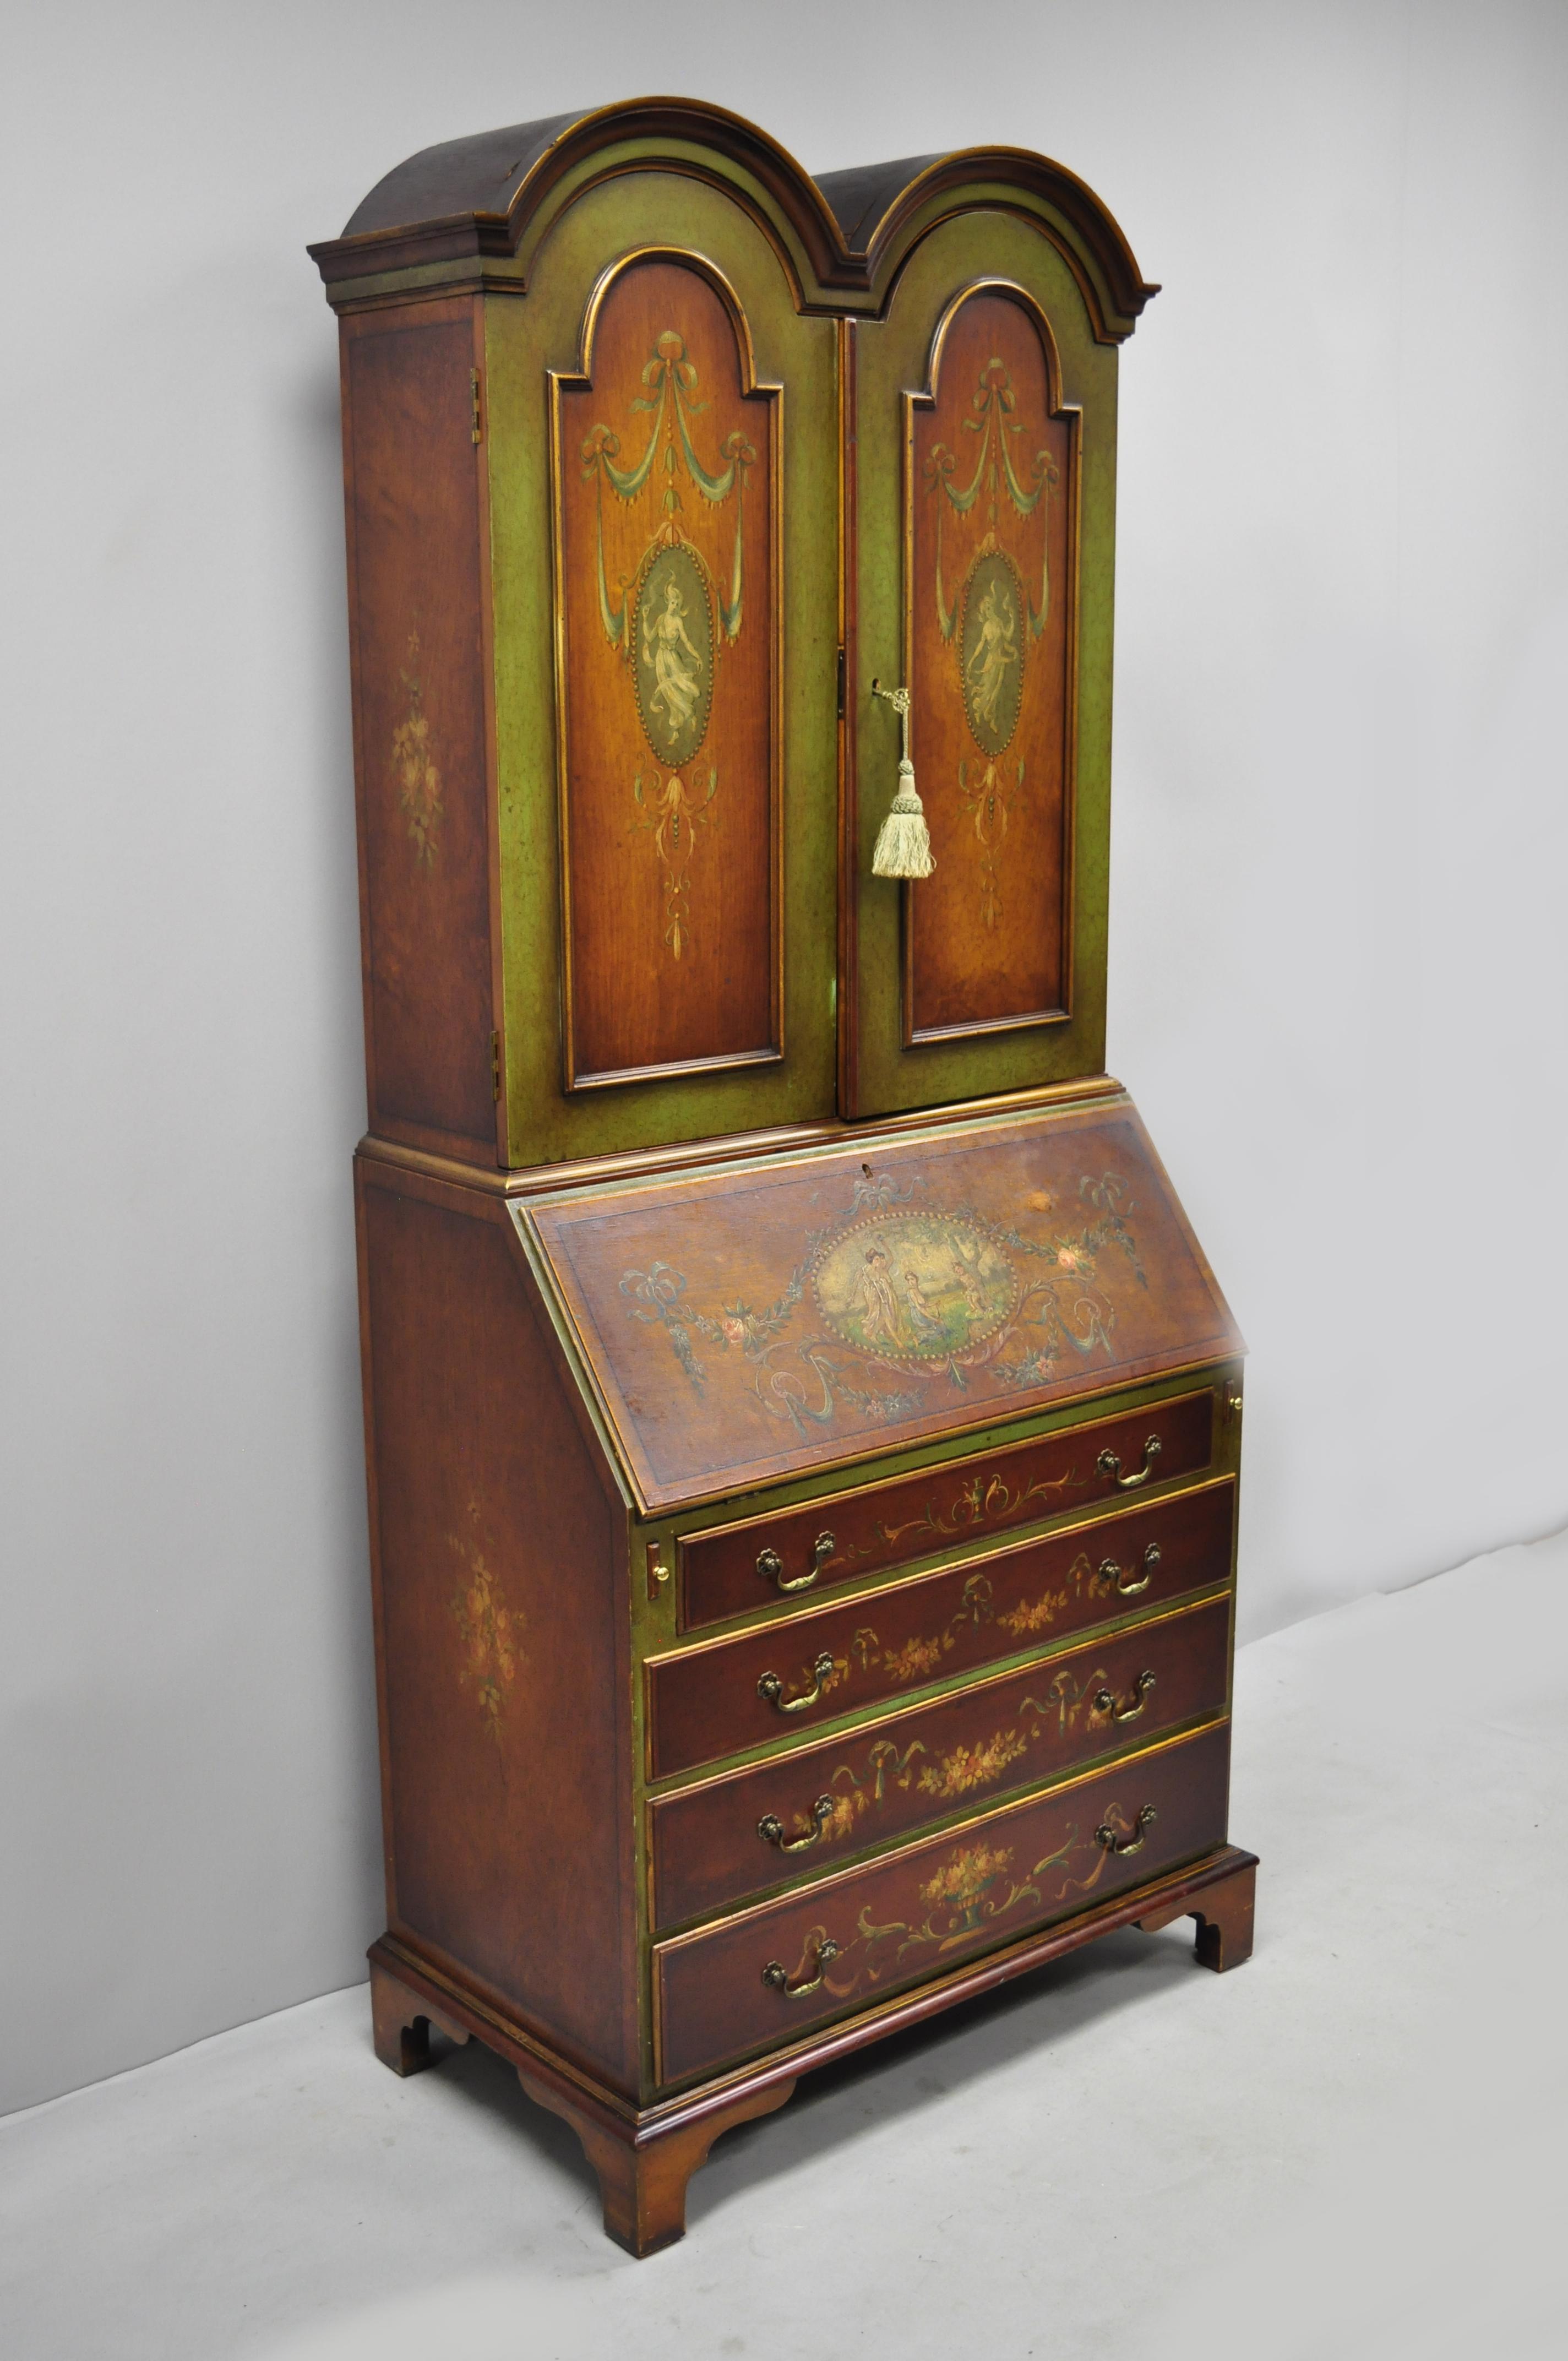 Early 20th century English Adams style hand painted double bonnet top secretary desk. Item features double bonnet top, hand painted figural scenes to the front and sides, 2 swings, working lock and key, 4 dovetailed drawers, 2 wooden shelves, solid